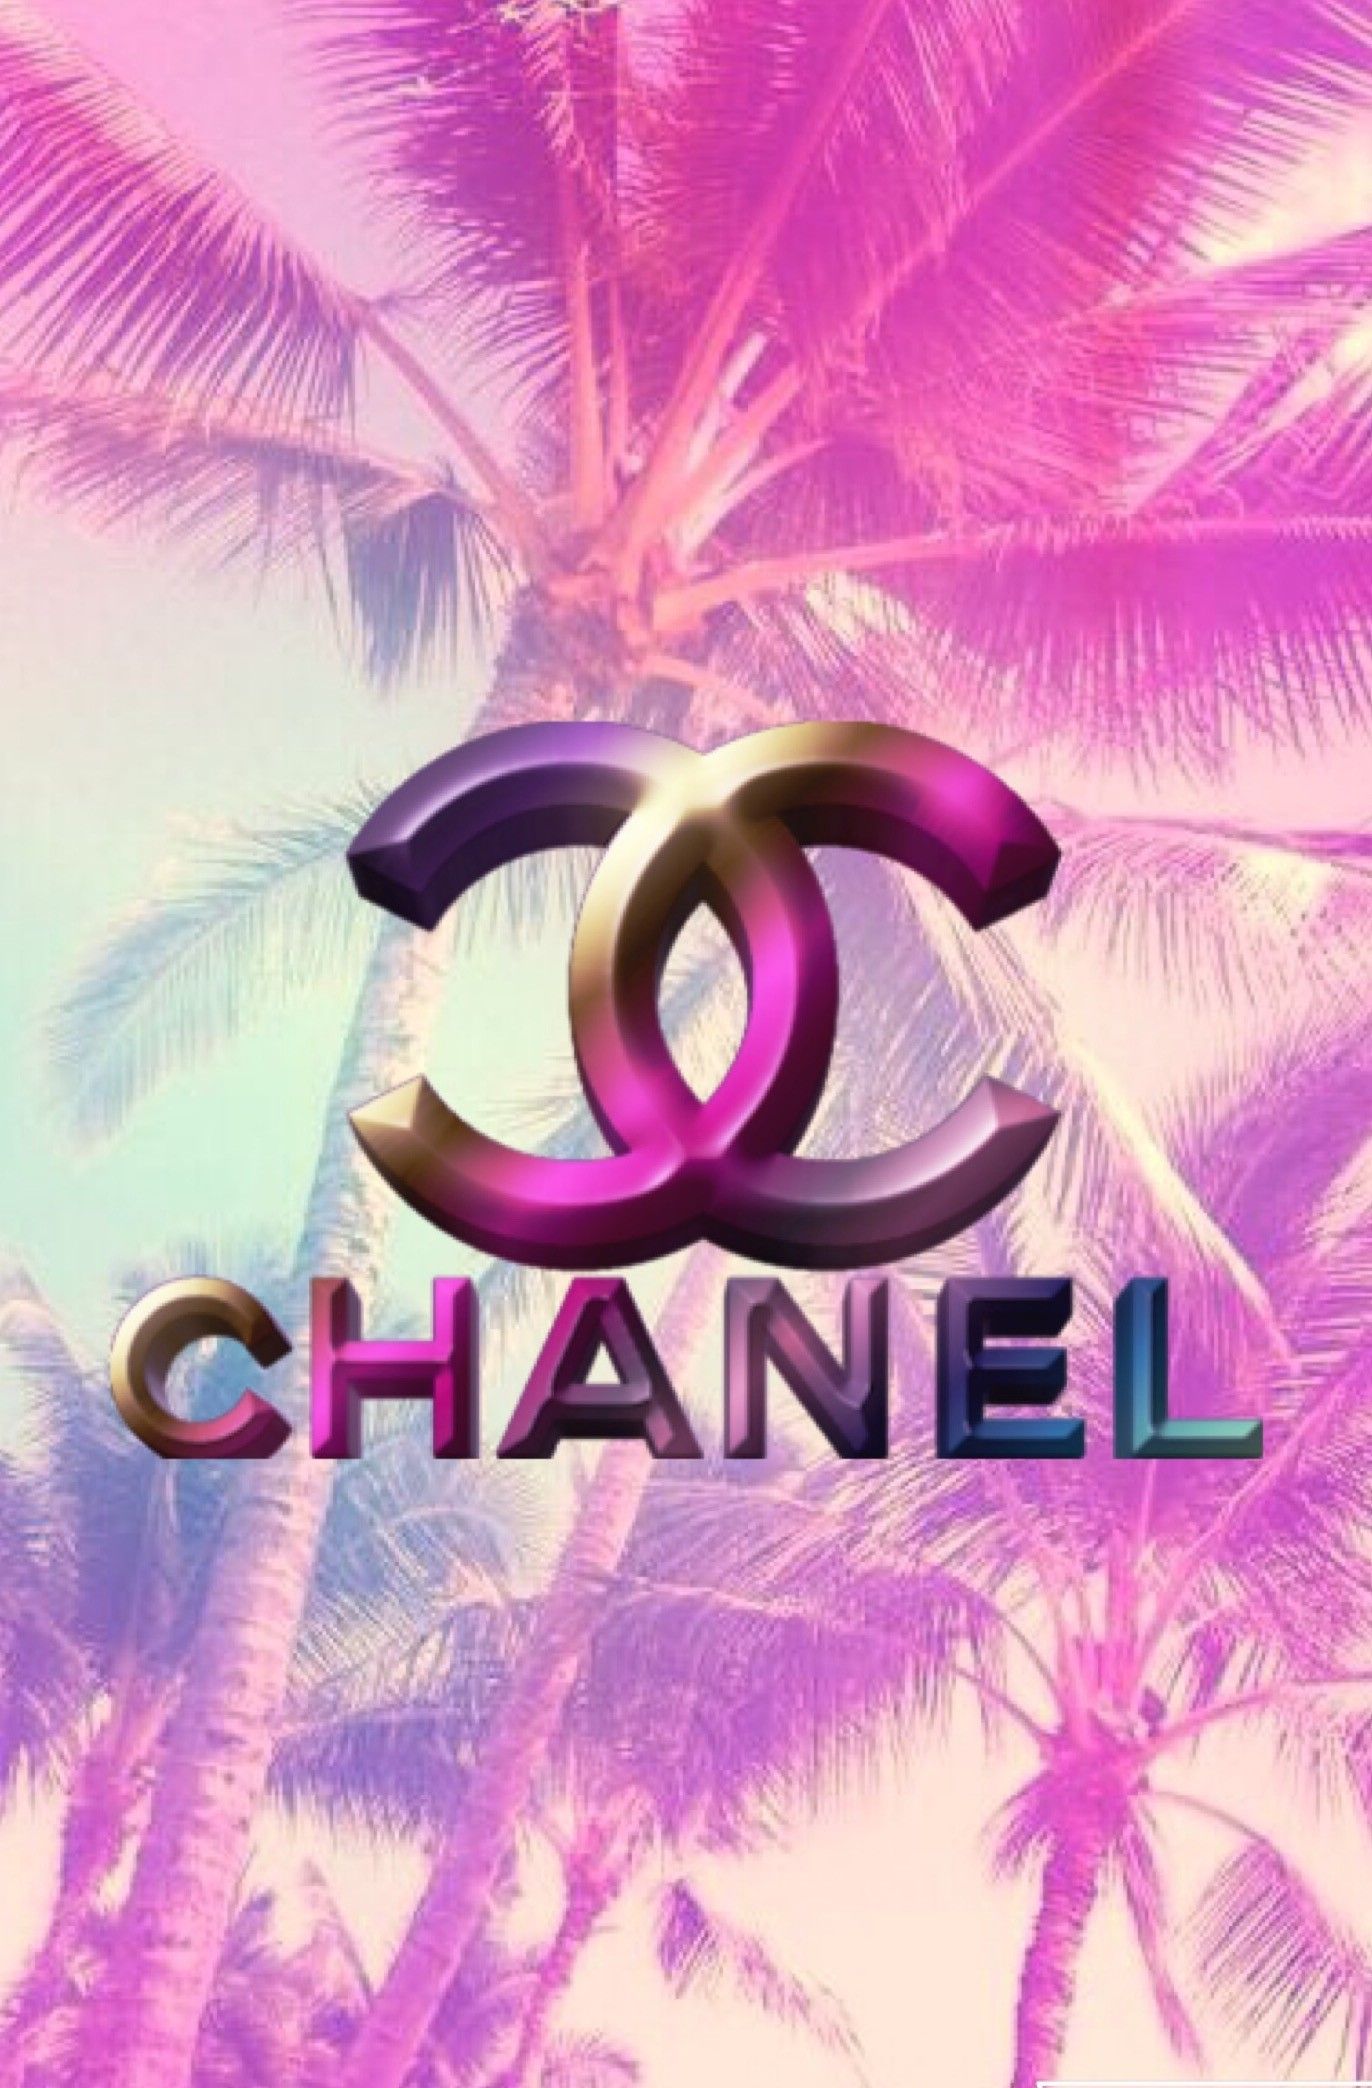 Coco Chanel wallpaper by nawtyangel22 - Download on ZEDGE™